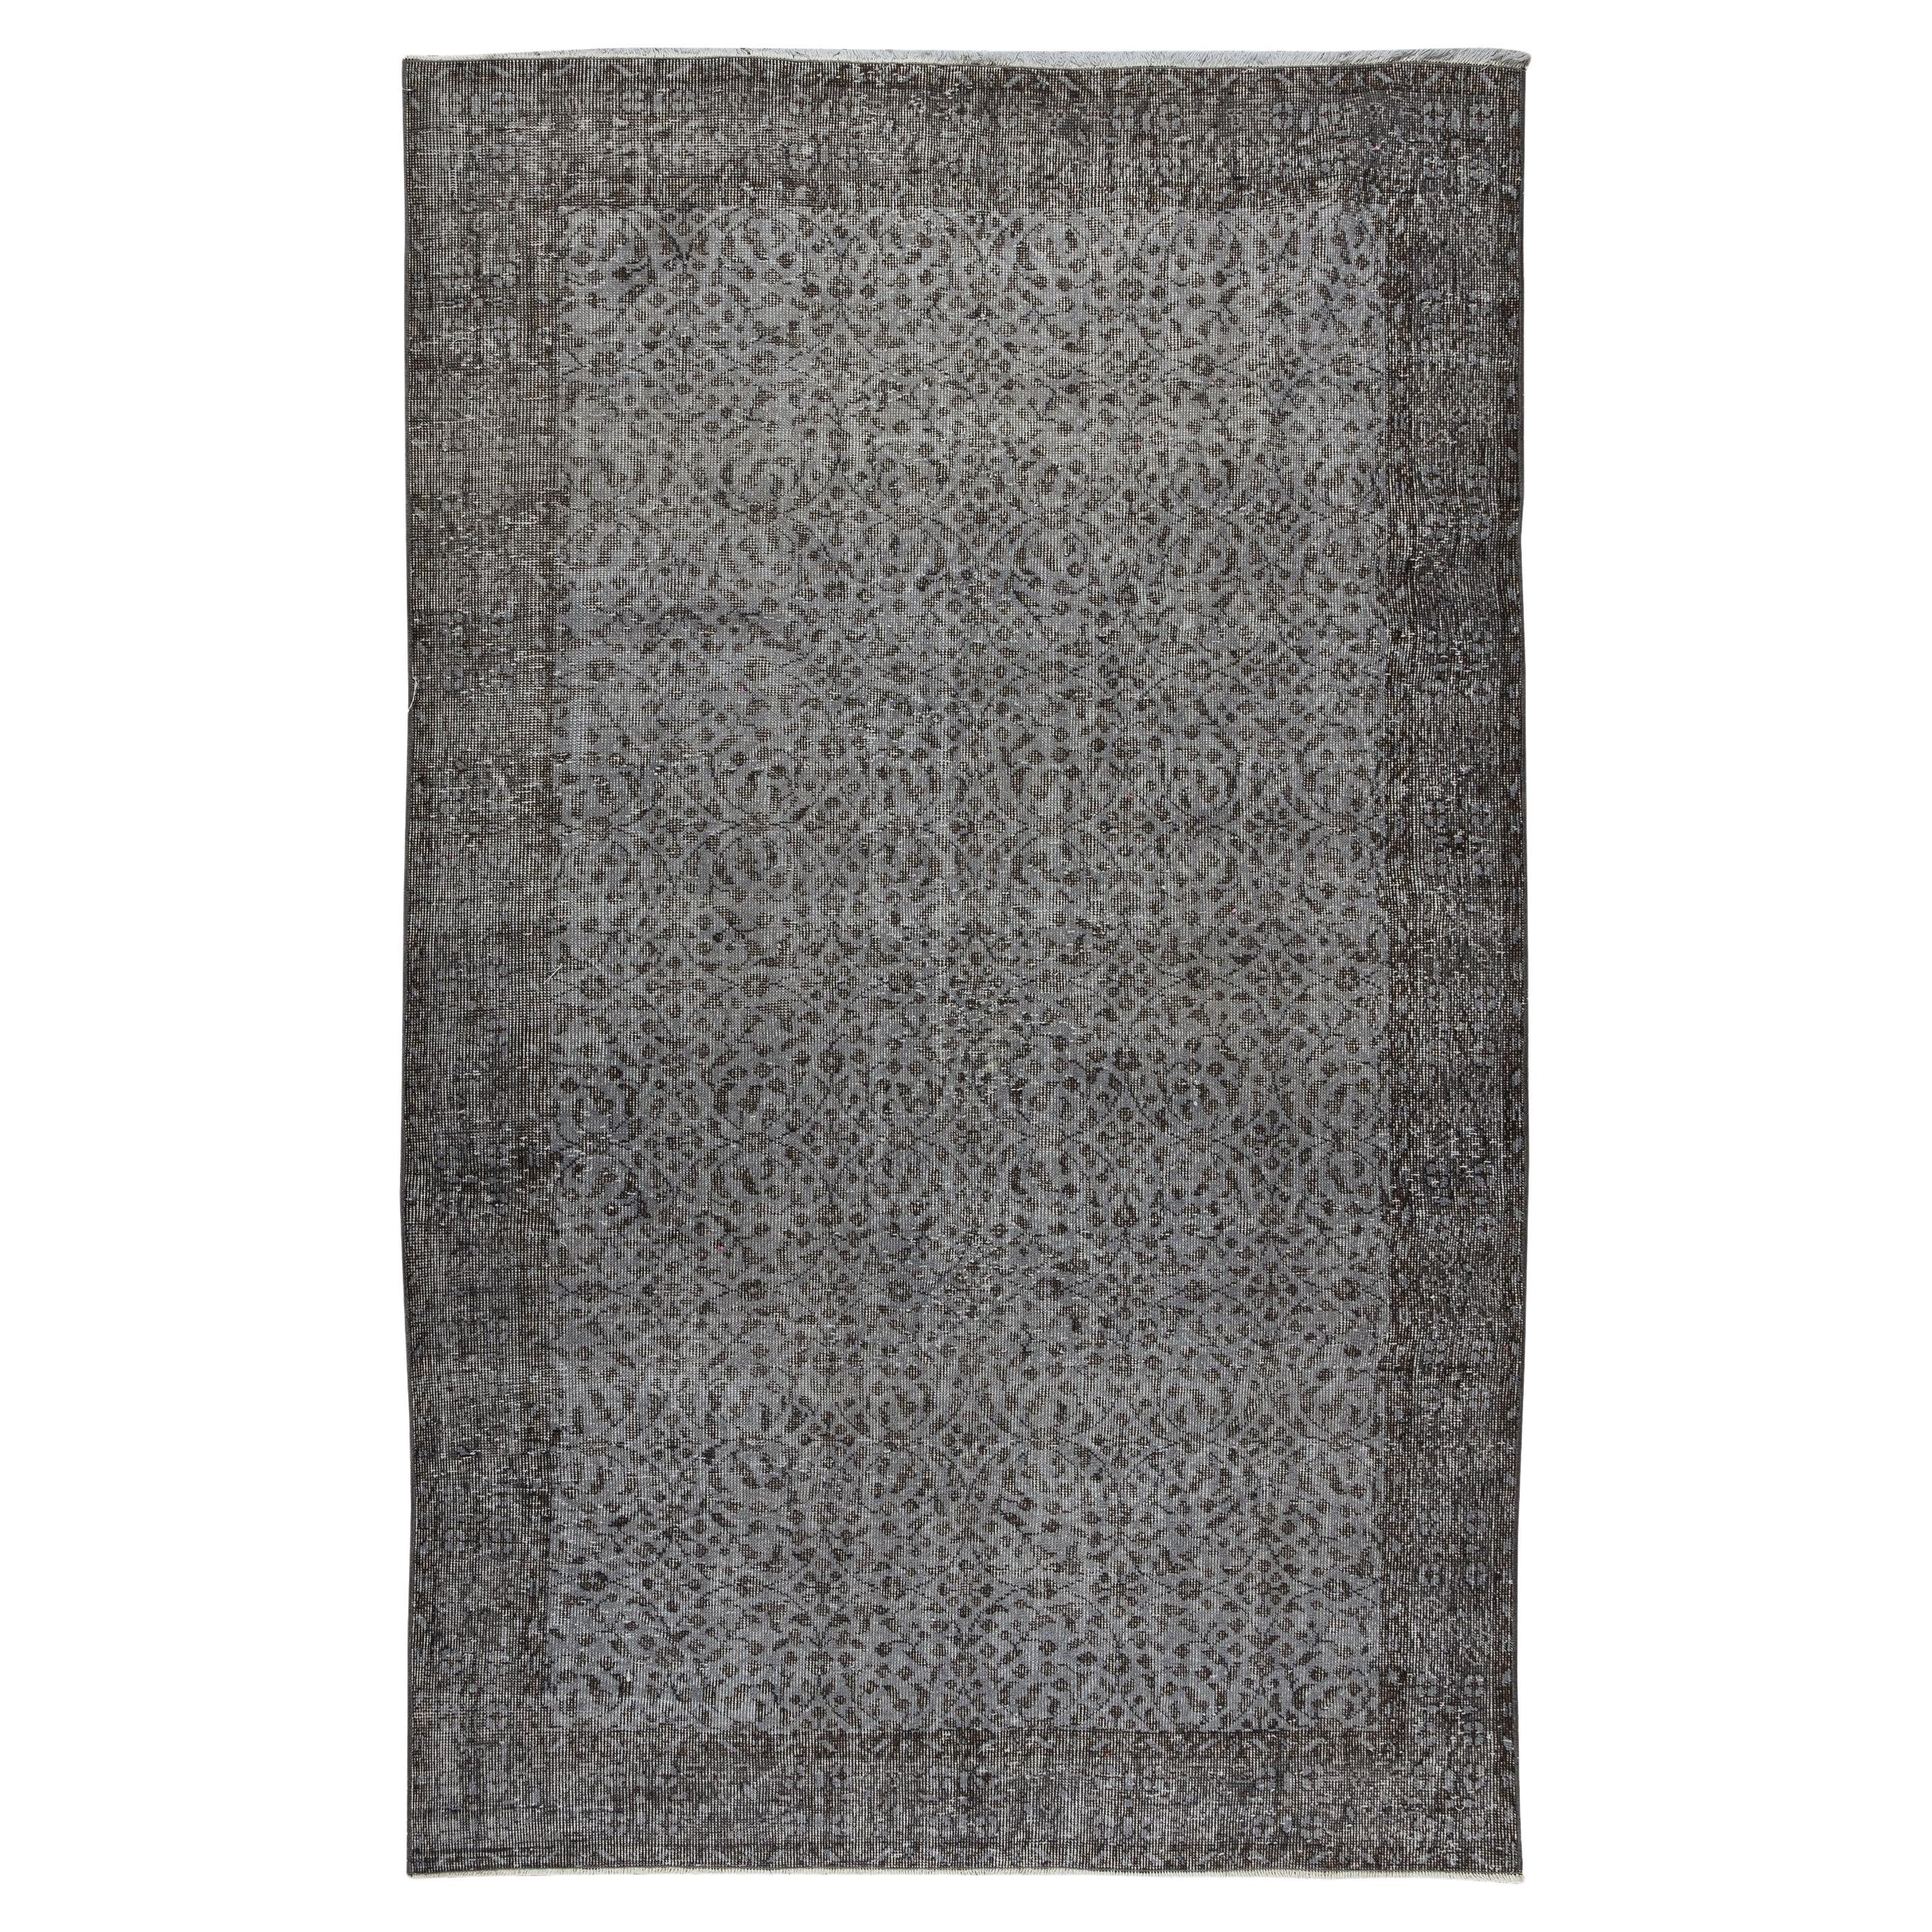 5.6x8.9 Ft Contemporary Turkish Rug Re-Dyed in Gray, Vintage Turkish Wool Carpet For Sale